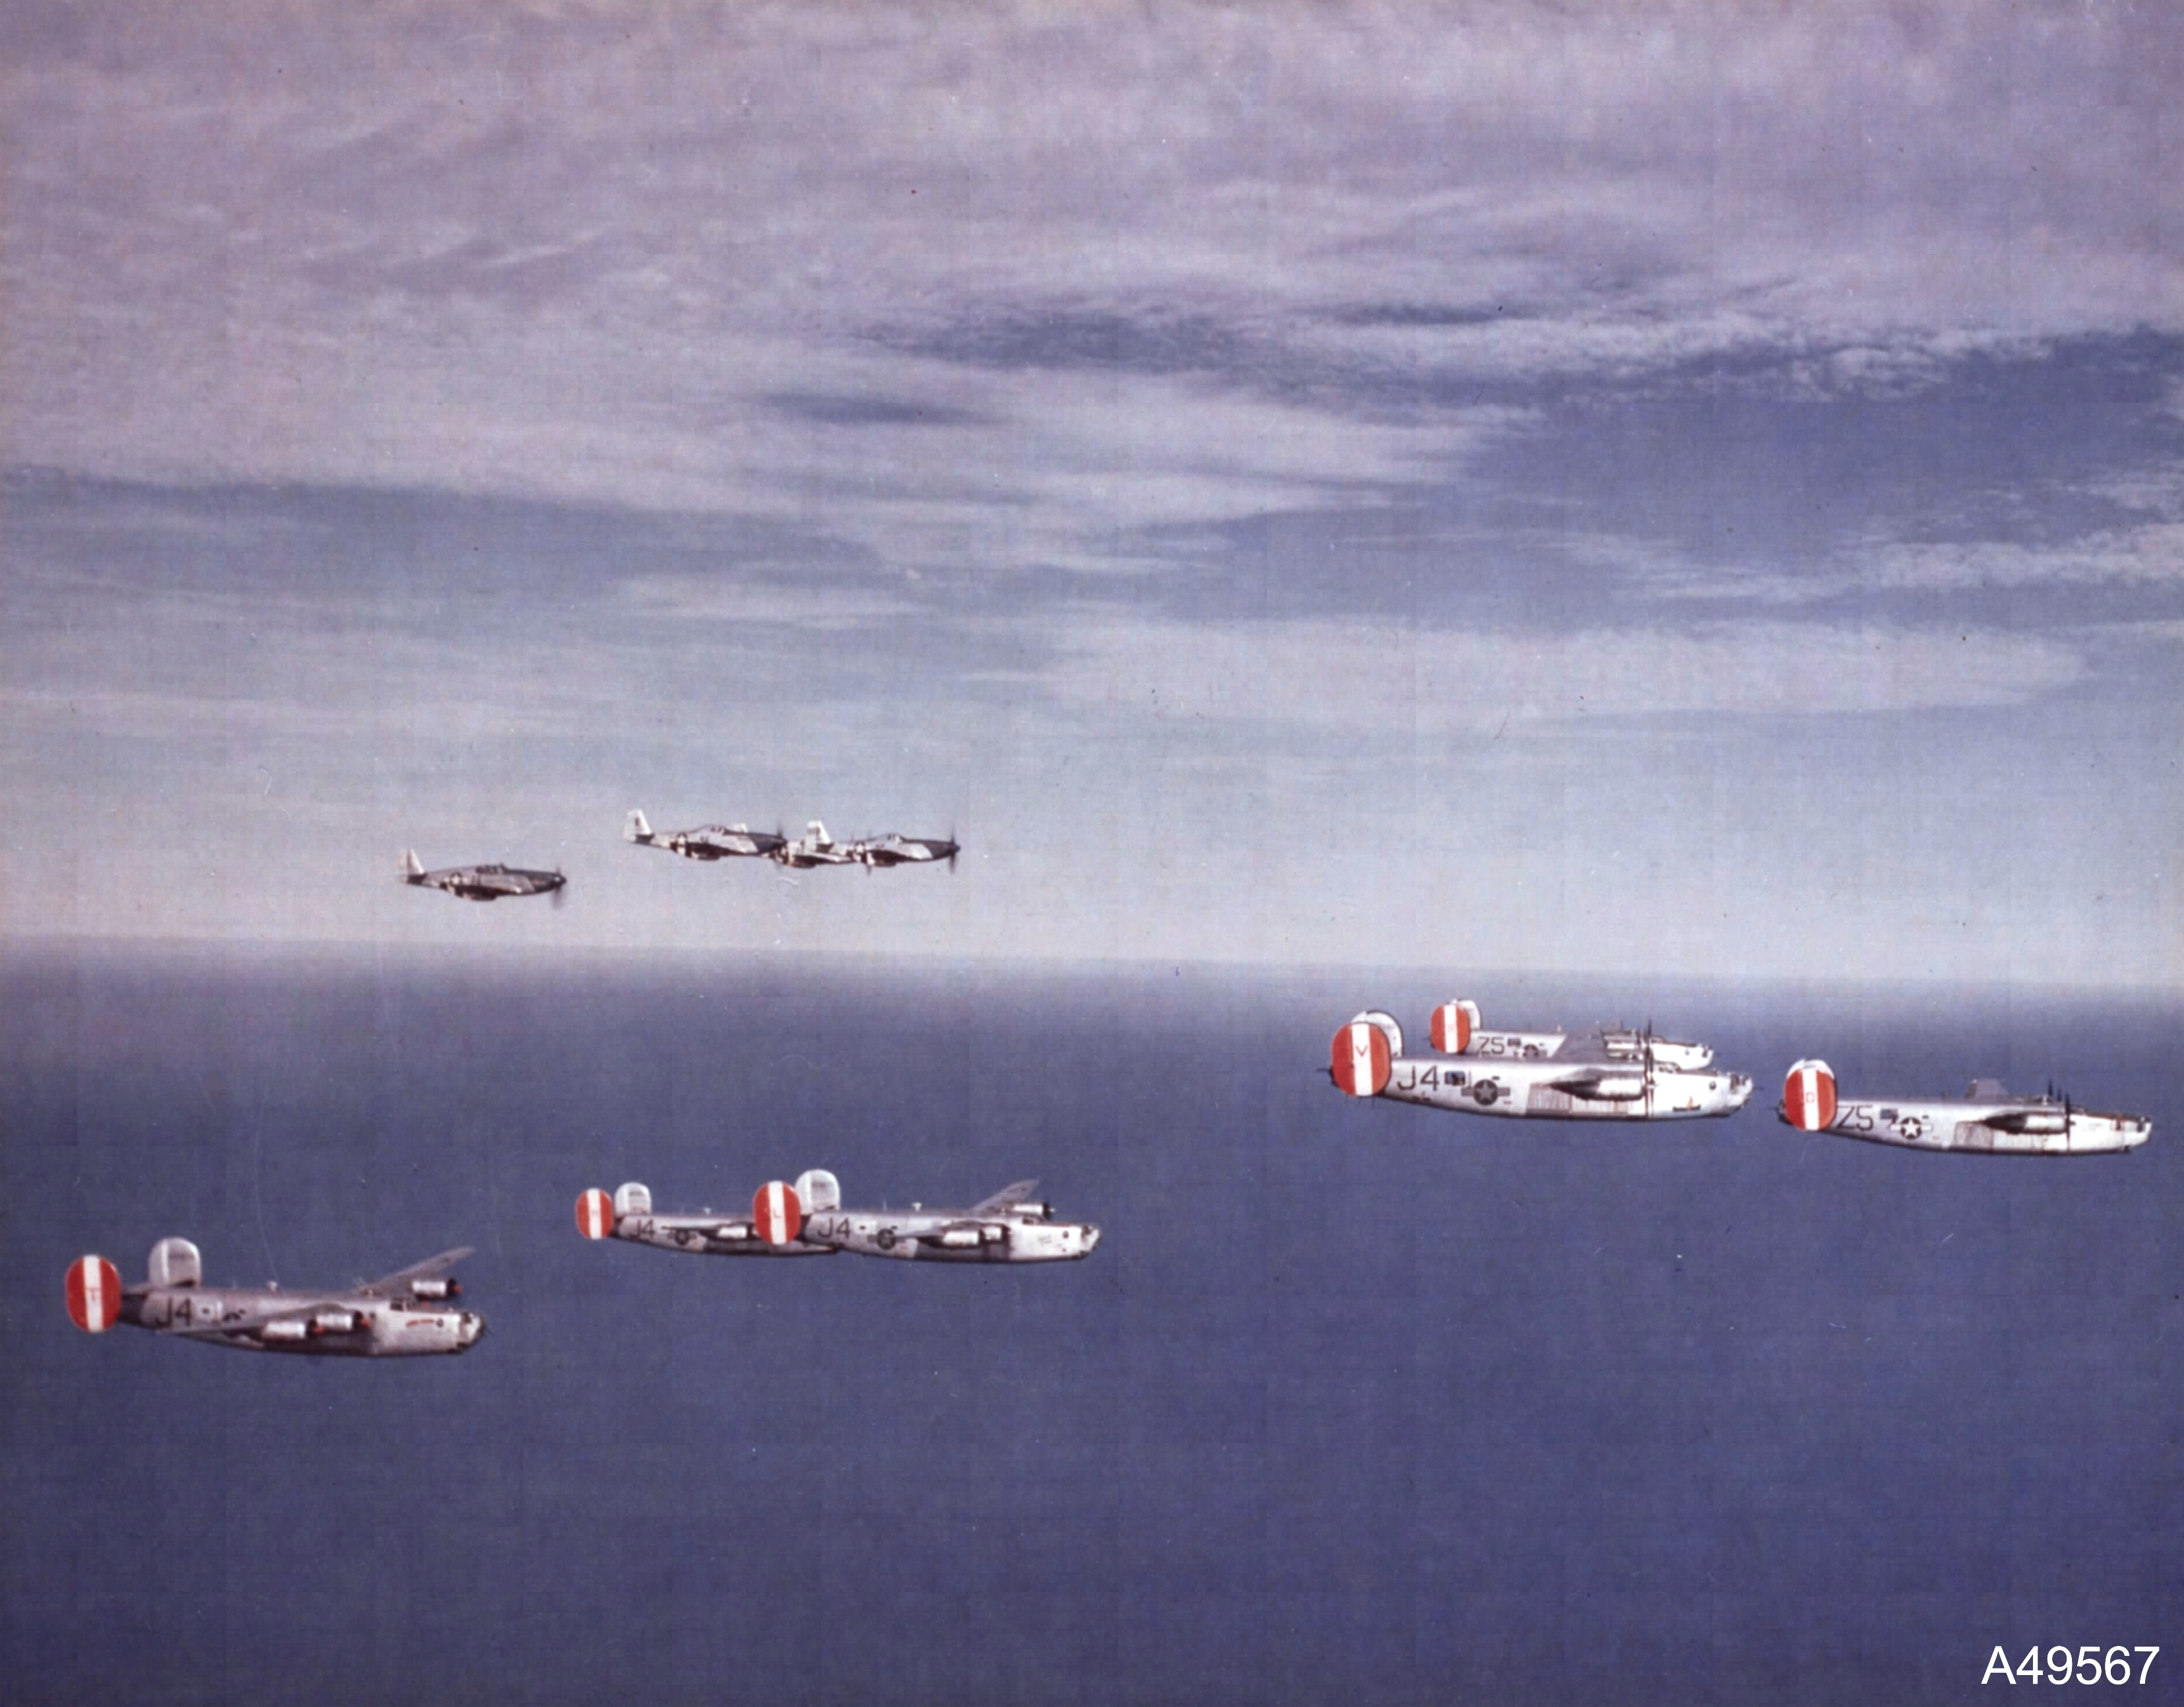 B-24 Liberators of 458th Bomb Group are escorted by P-51 Mustangs of the 486th Fighter Squadron, 1944-45. Photo 2 of 2.